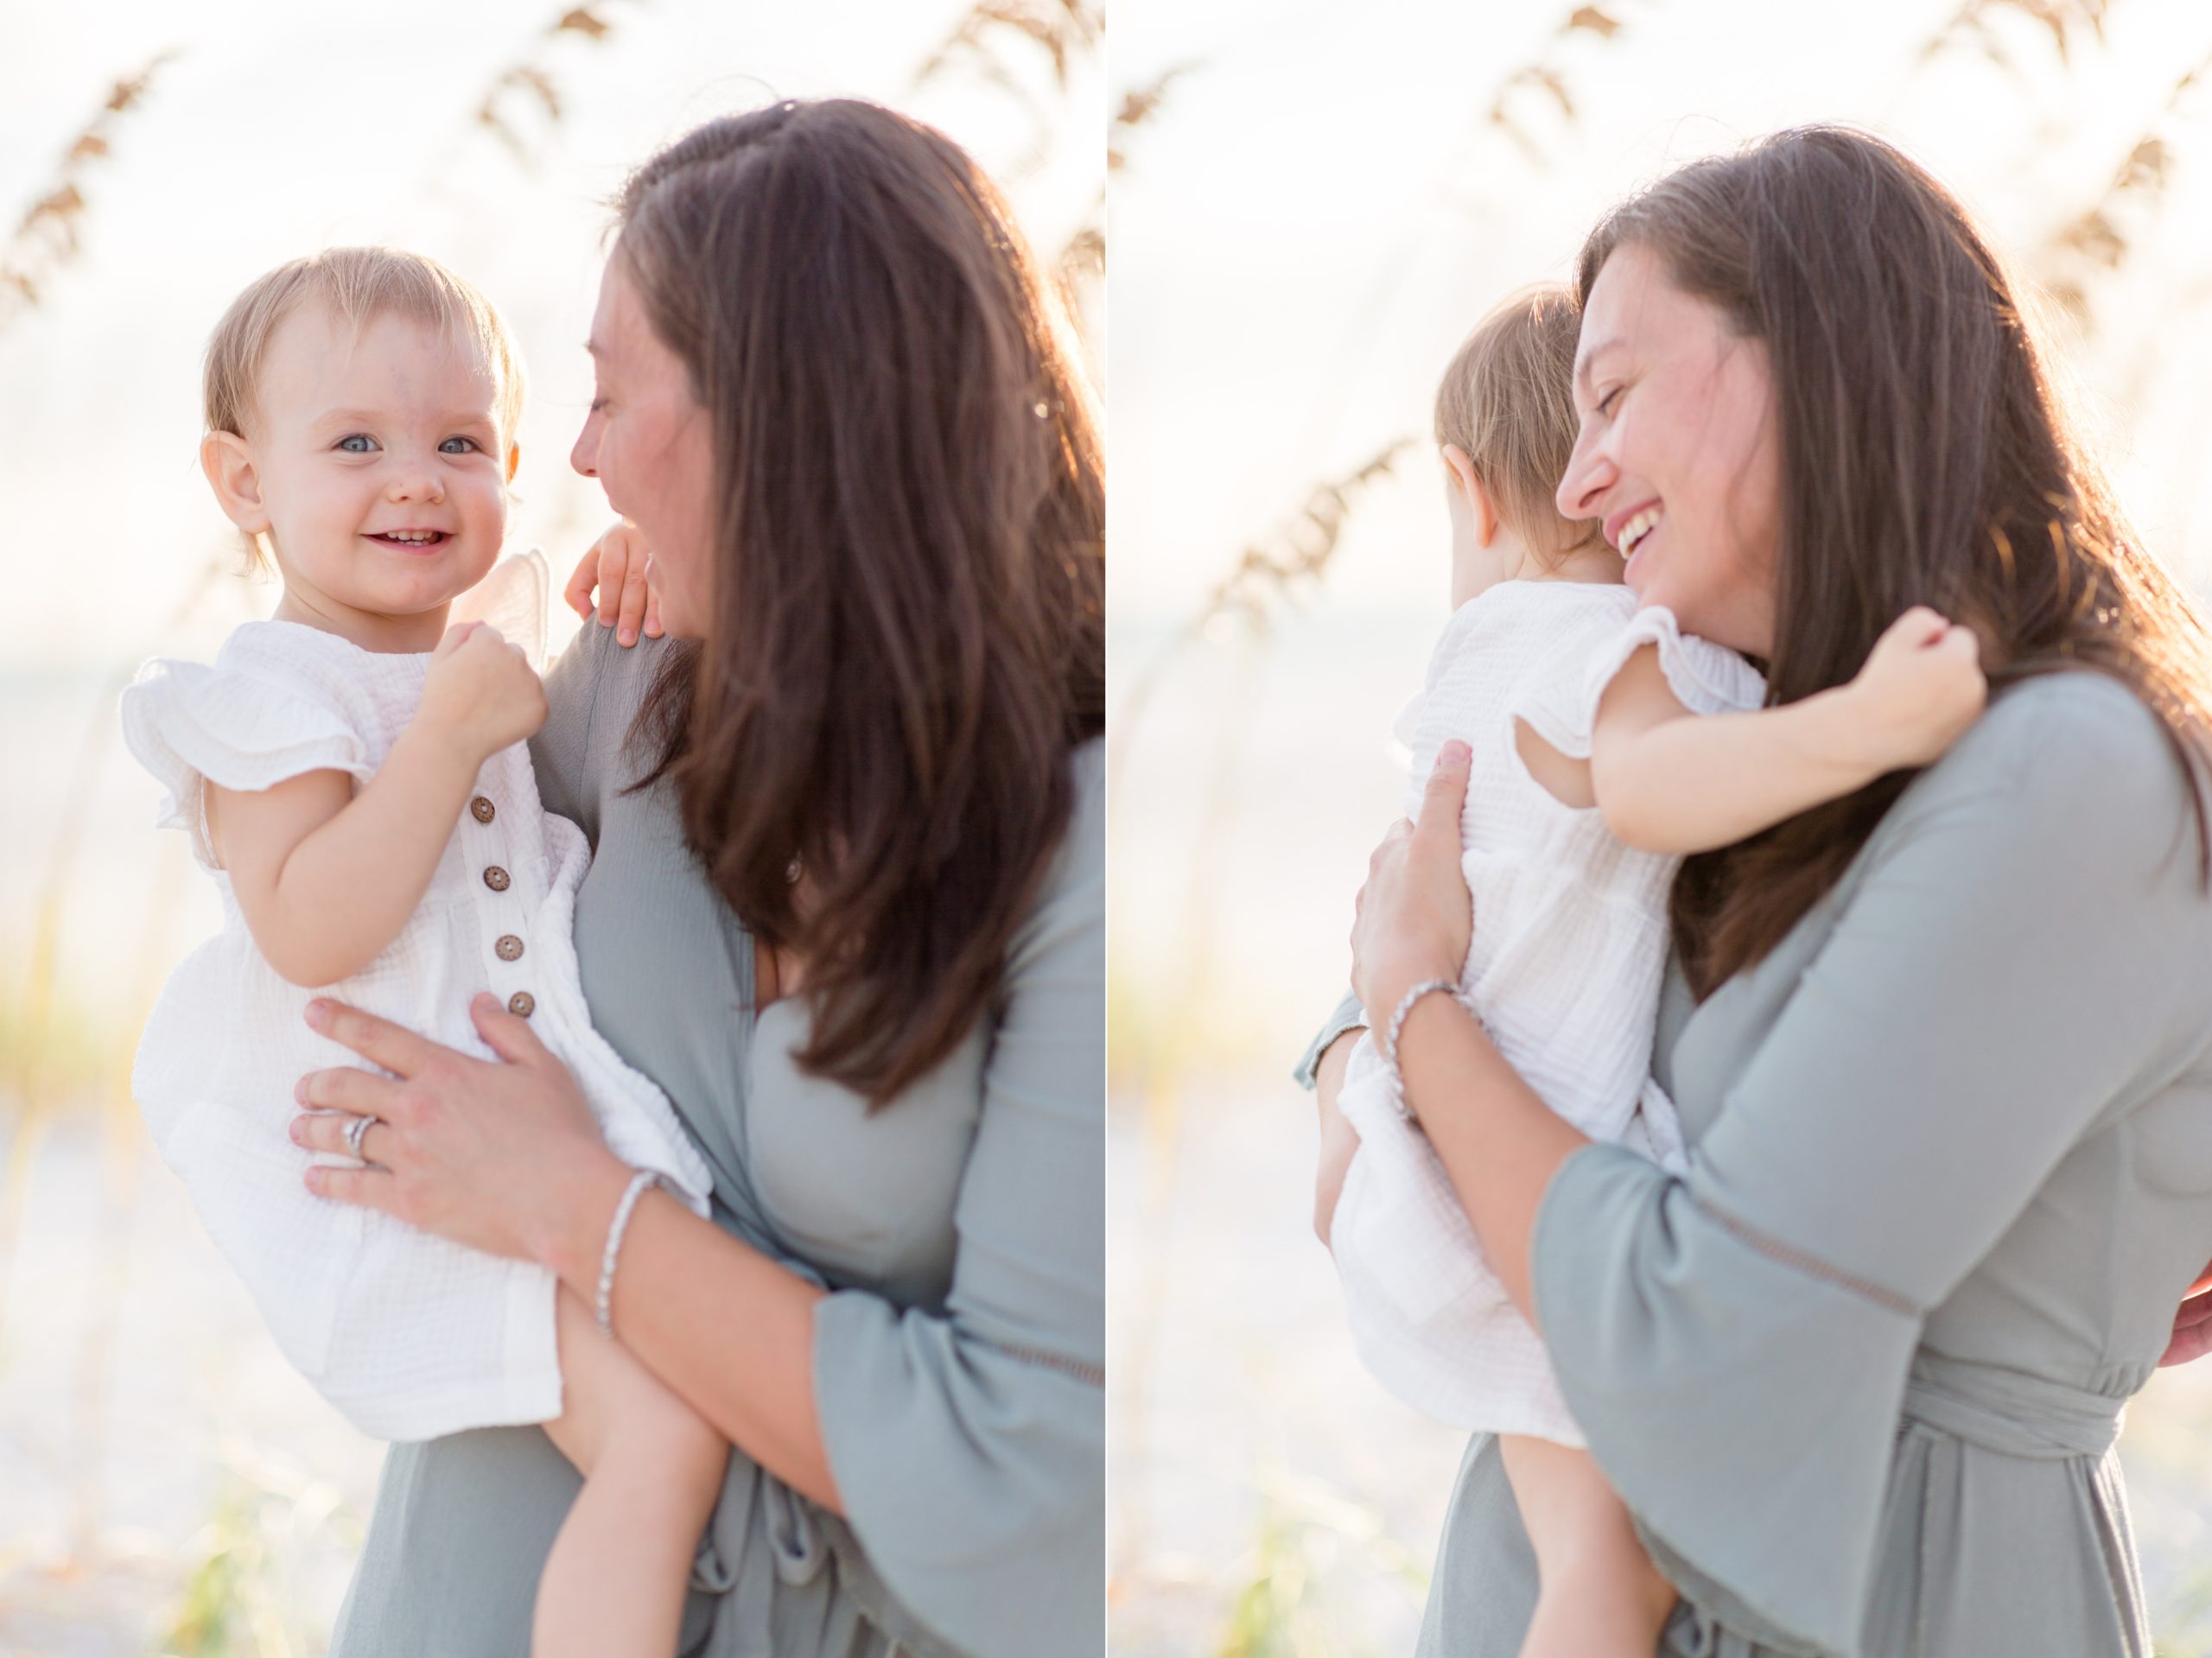 Mommy & me beach photos with family photographer and educator Rebecca Rice of Rebecca Rice Photography. Click to see more from this portrait session on the blog now! 